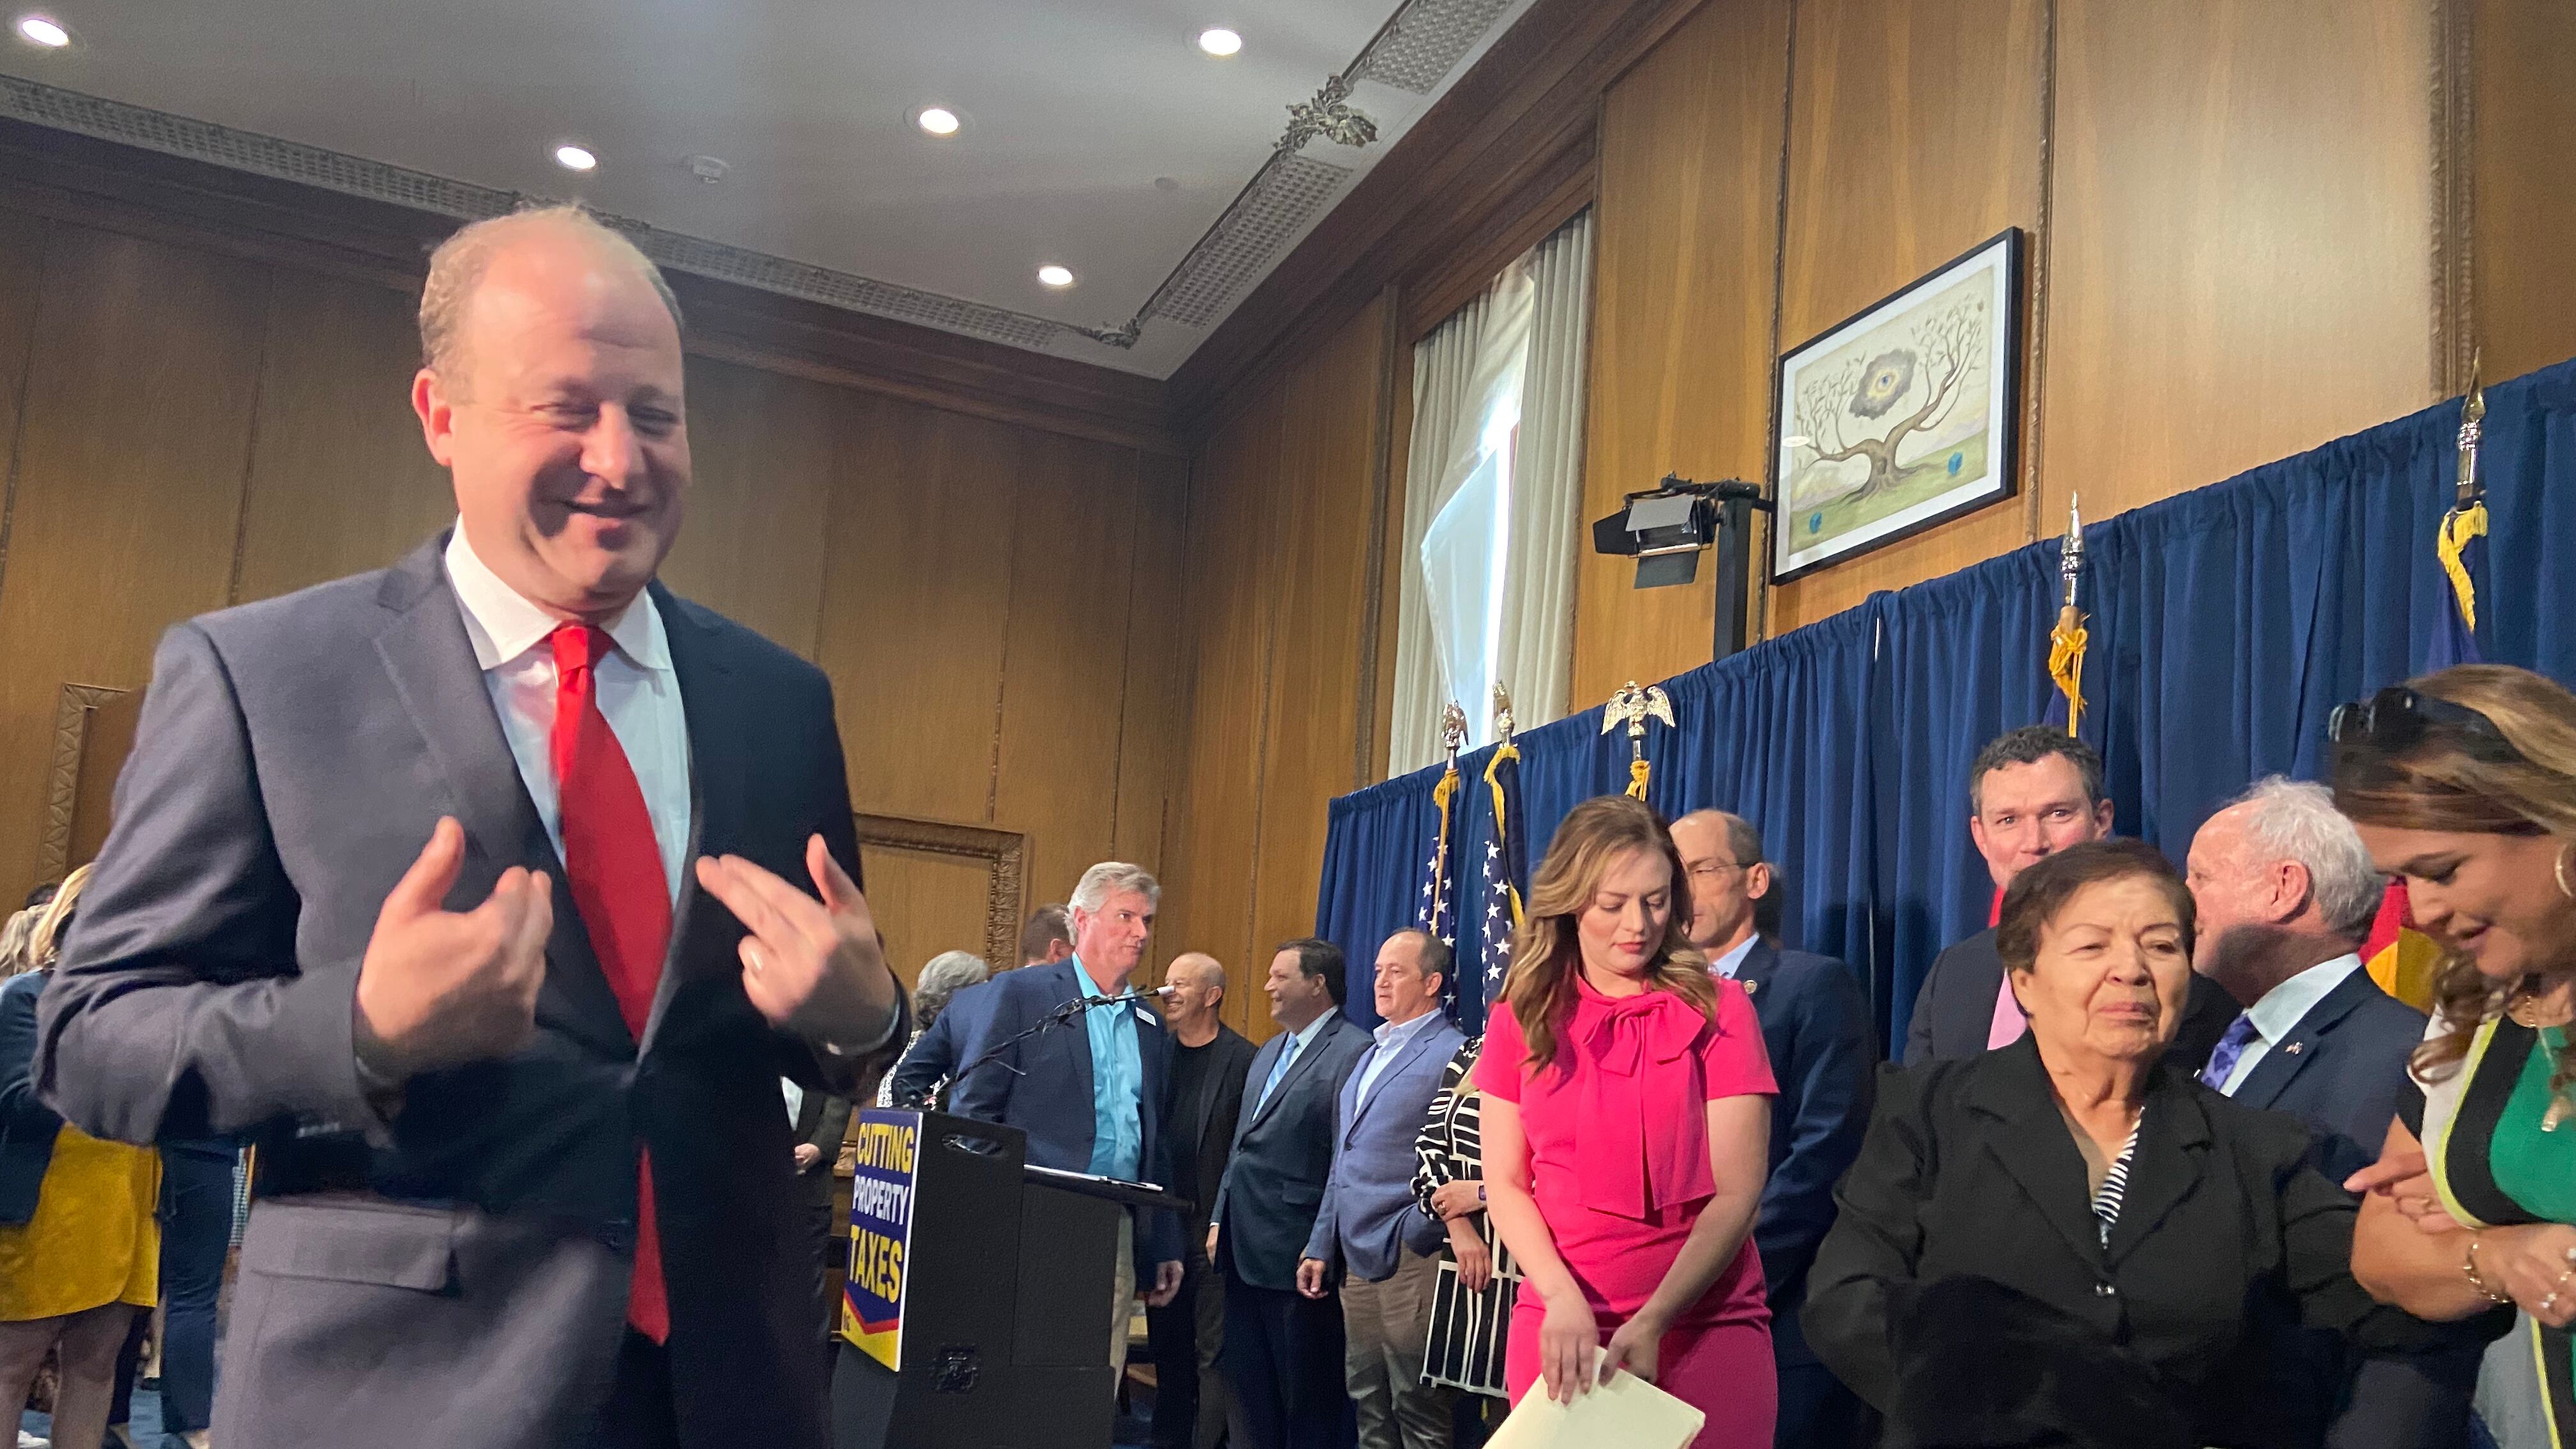 Gov. Jared Polis, standing in a suit and a red tie, seems to point to himself while smiling. Men and women stand, some holding papers, behind him in front of a blue curtain.